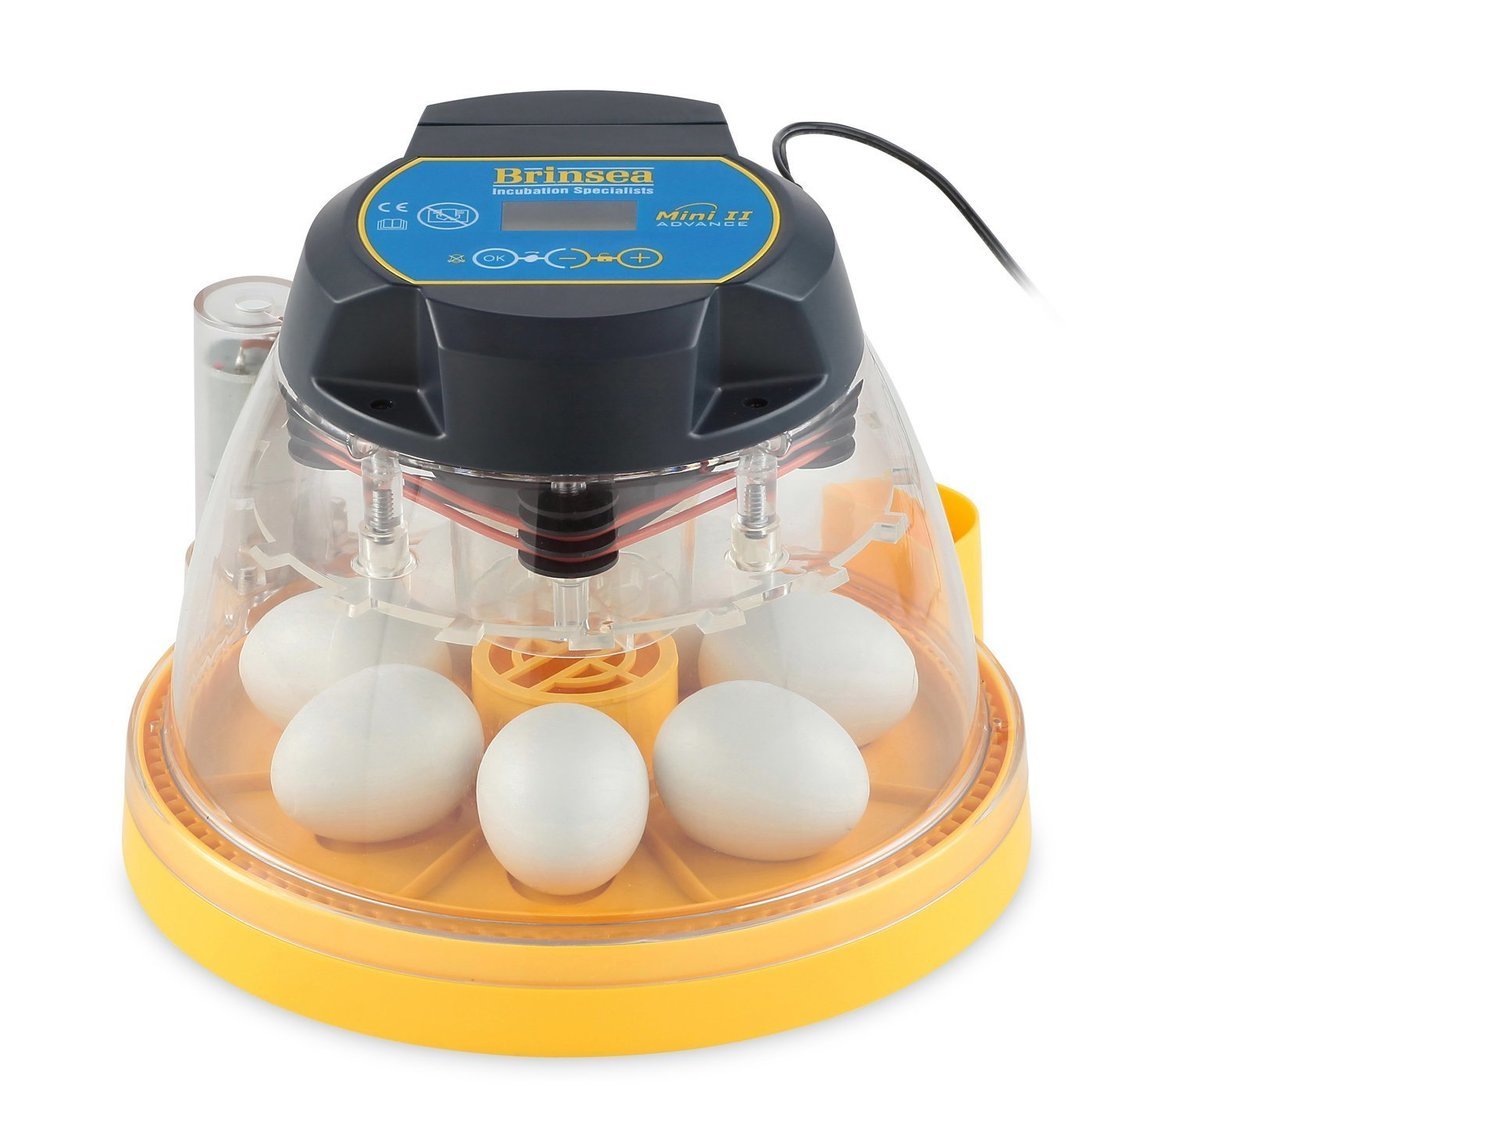 brinsea products fully automatic egg incubator for hatching